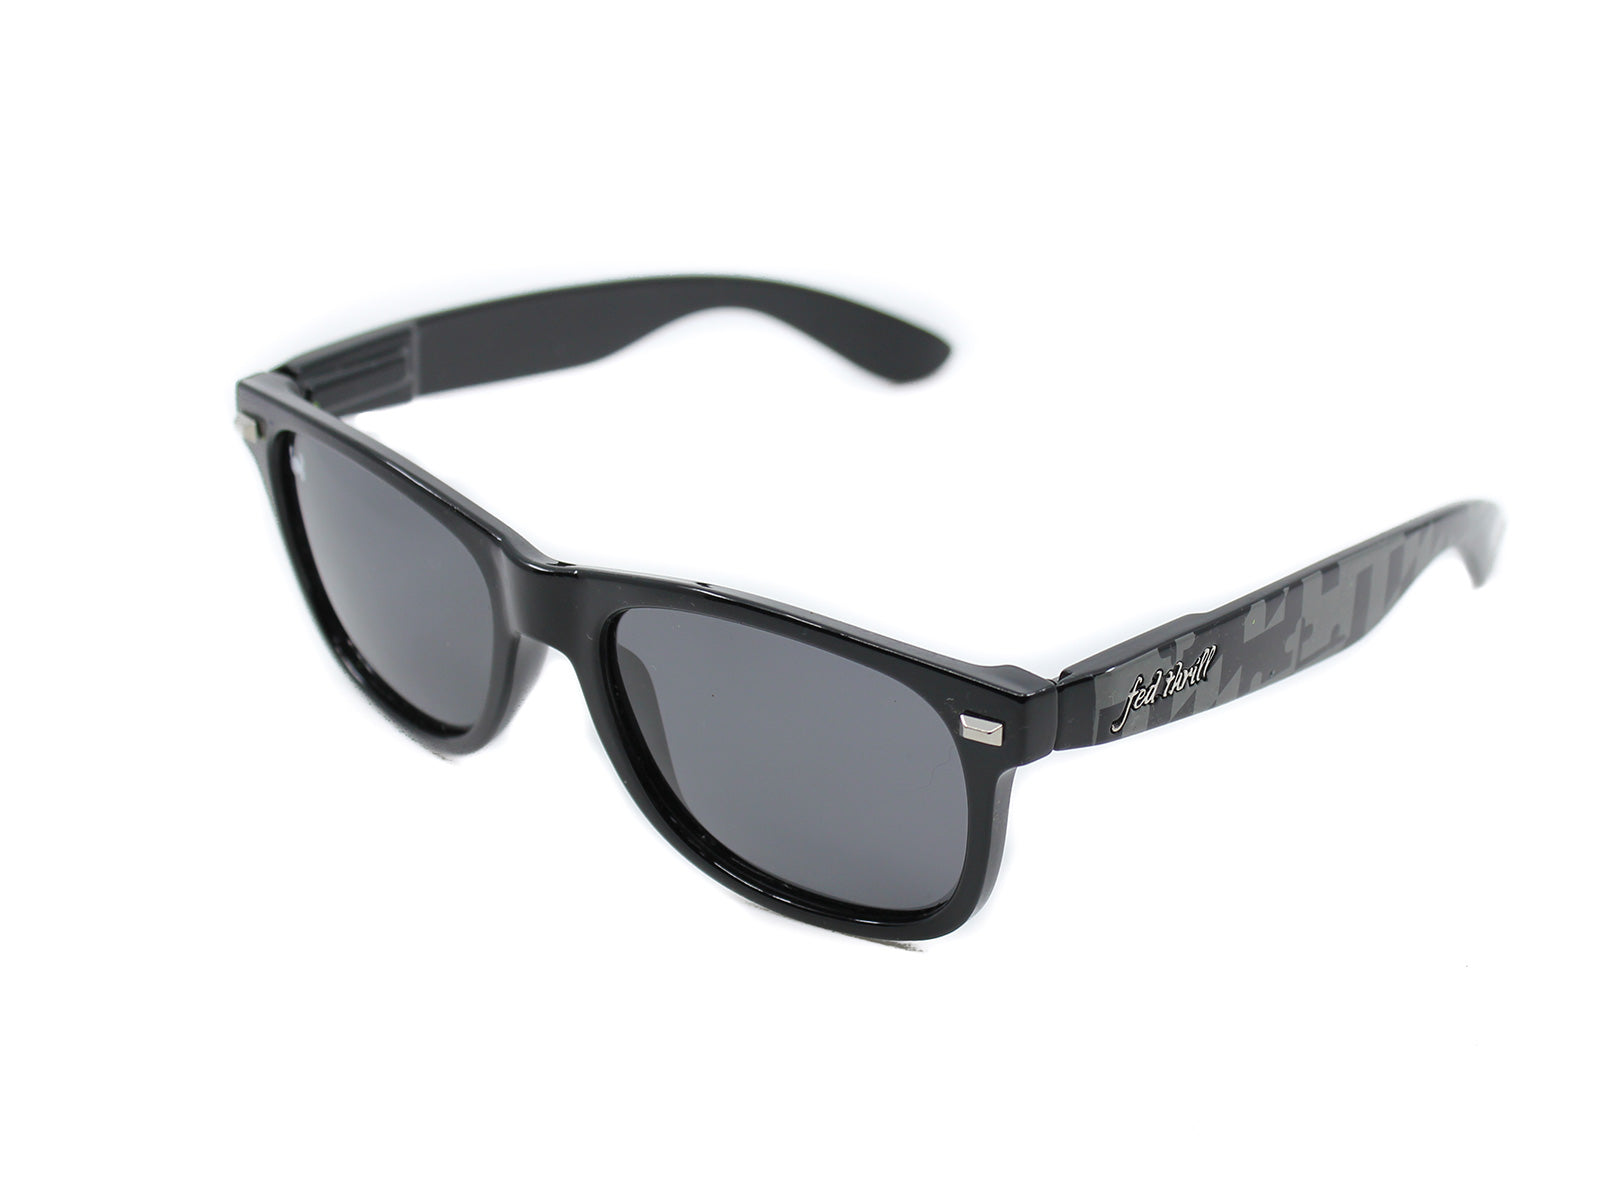 Fultons - MD Stealths I: Glossy Black Front / Black & Gray MD Flag Arms / Crab Smoke Polarized